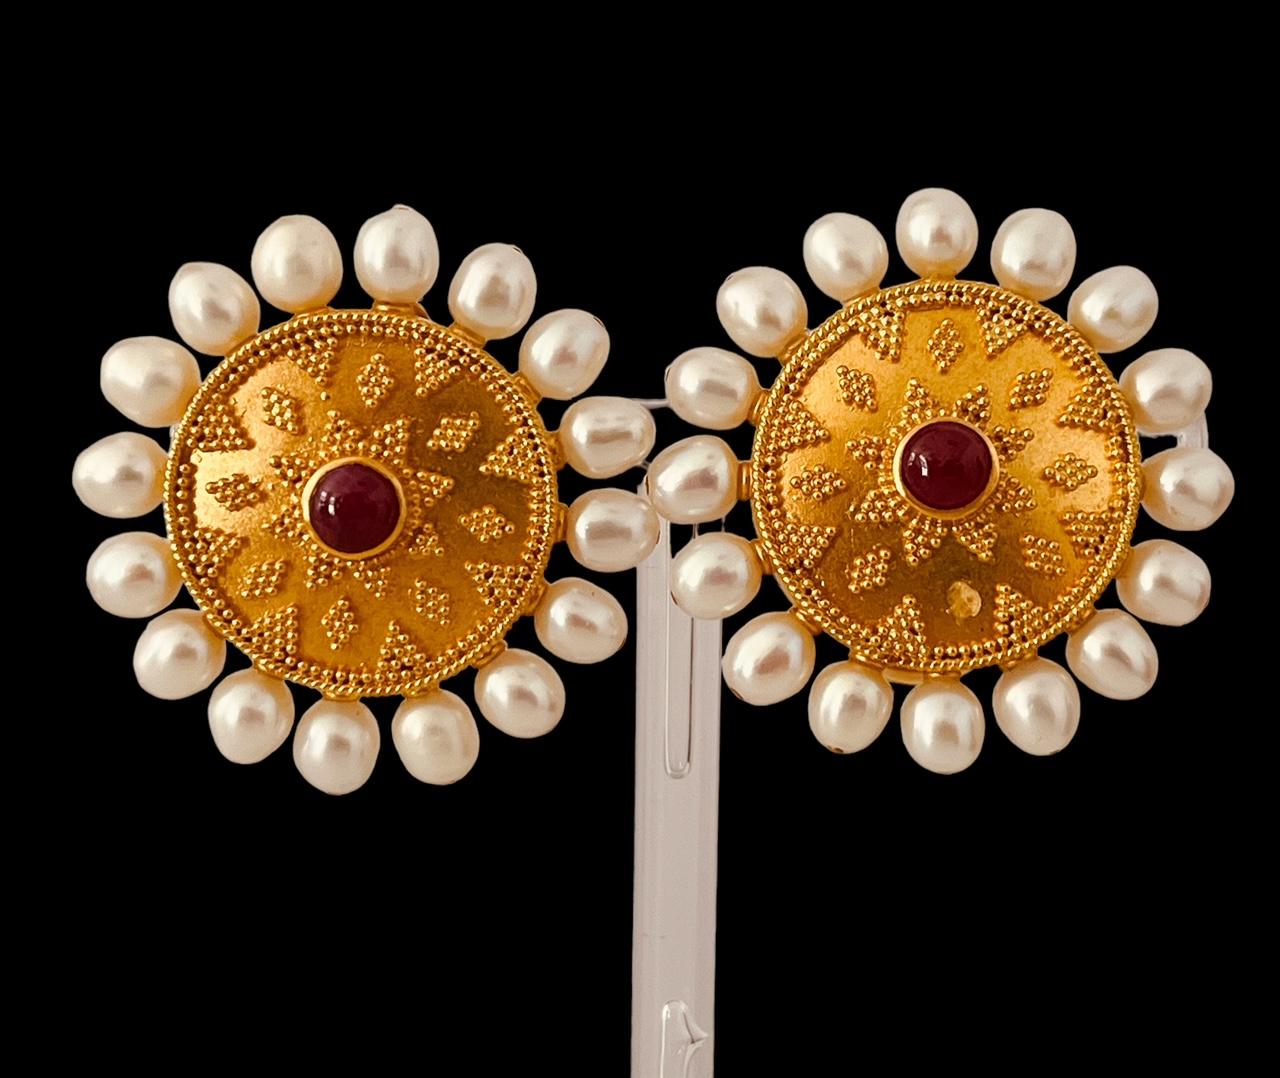 22ct Gold Granulated Disc Earrings Set With A Cabochon Ruby And Cultured Pearls For Sale 5